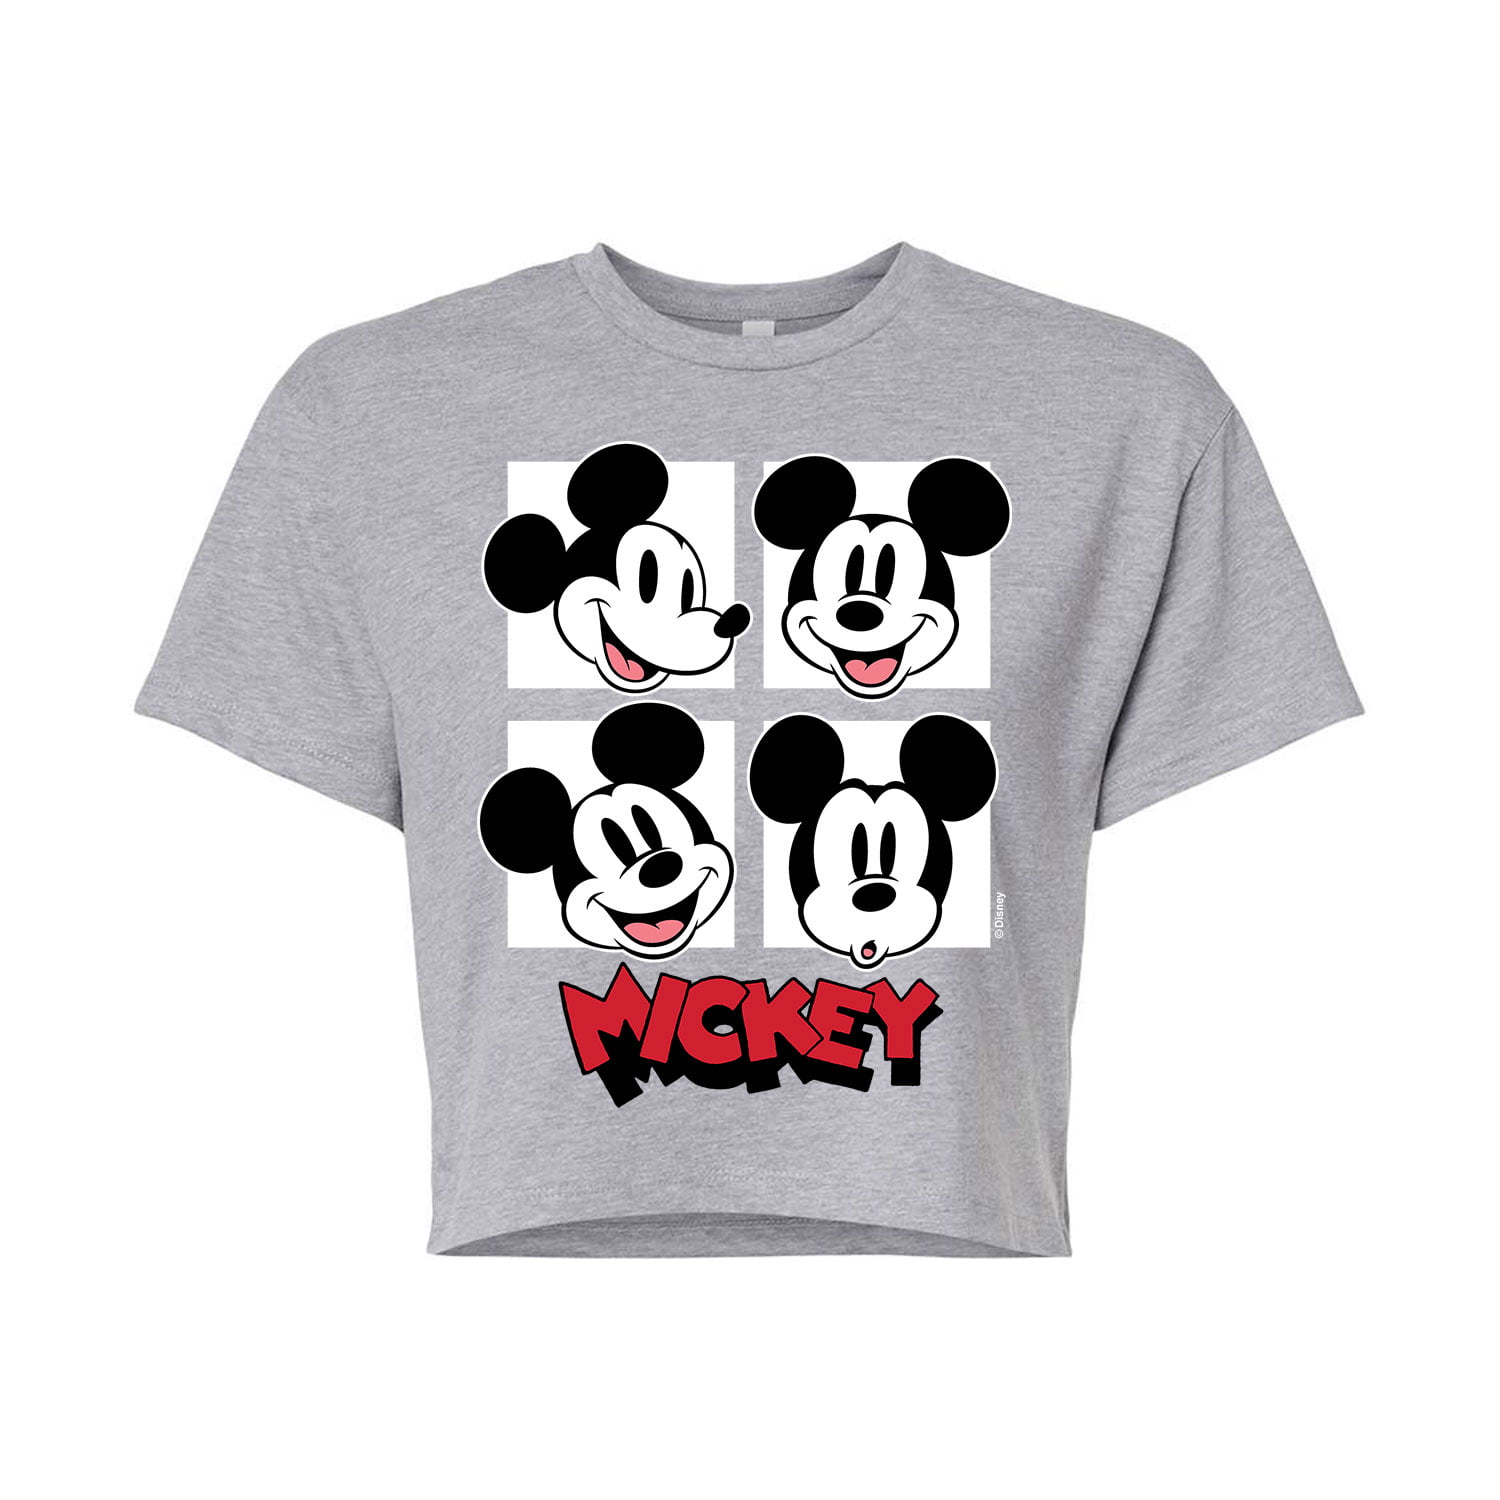 Kleding Dameskleding Tops & T-shirts Croptops & Bandeautops Bandeautops Black and White Mickey Mouse Tube Top 